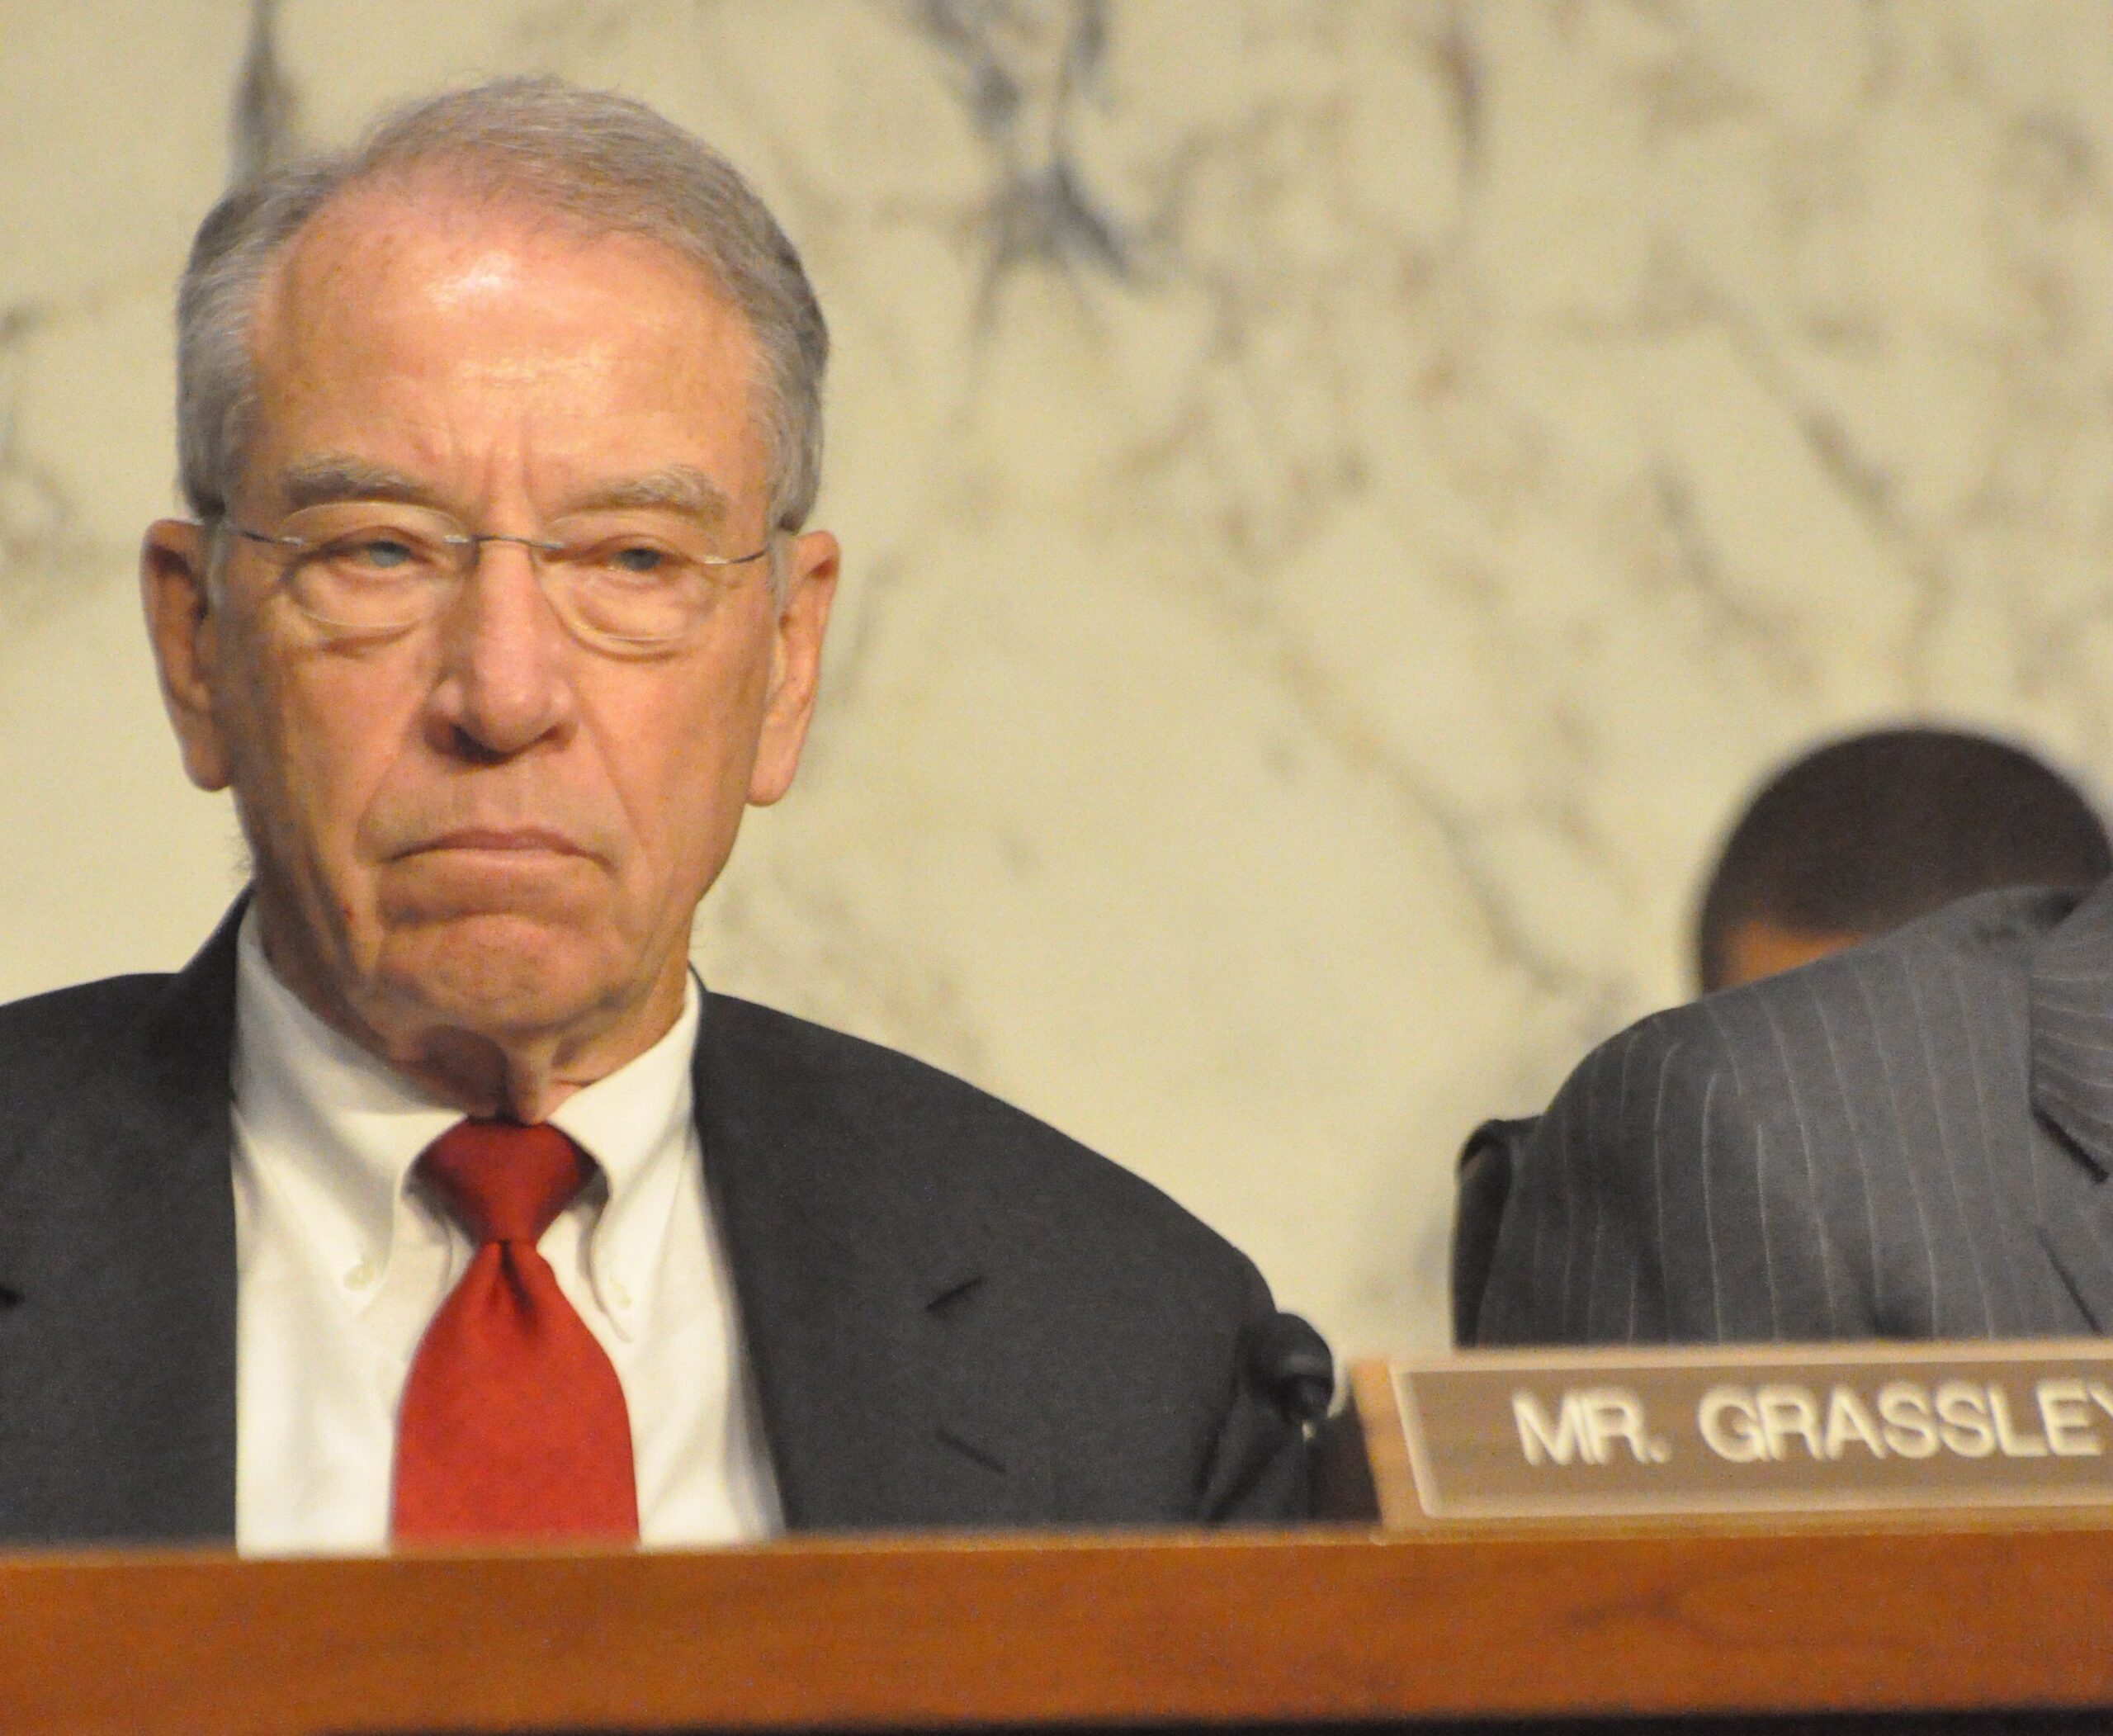 Sessions vs. Grassley: Sentencing Reform Sparks Fight on the Conservative Right